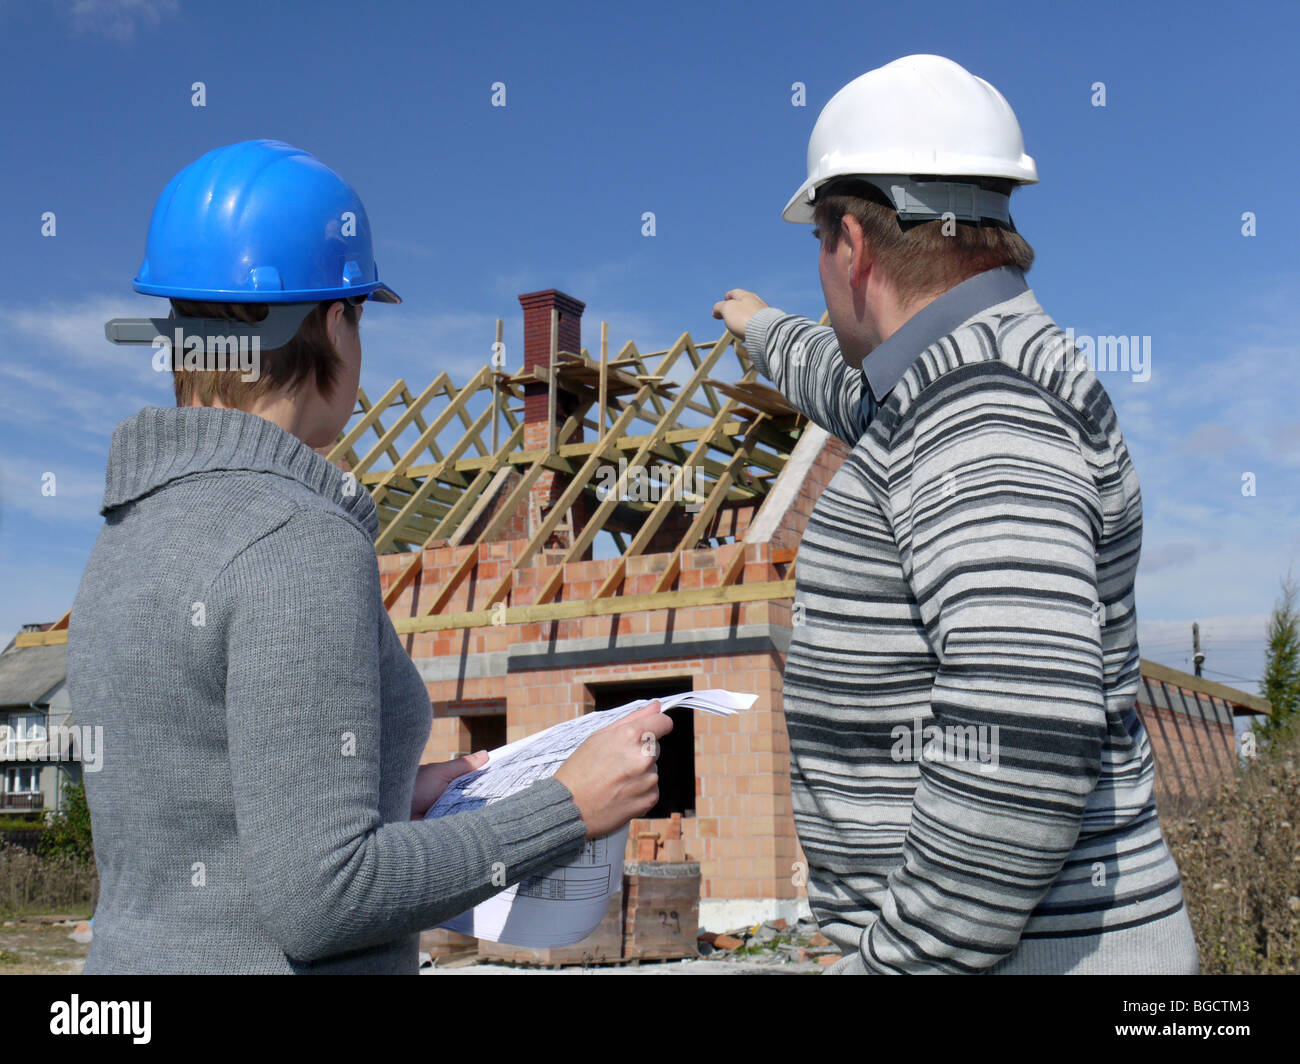 Female and male building engineers wearing helmets discussing building plans over unfinished brick house Stock Photo